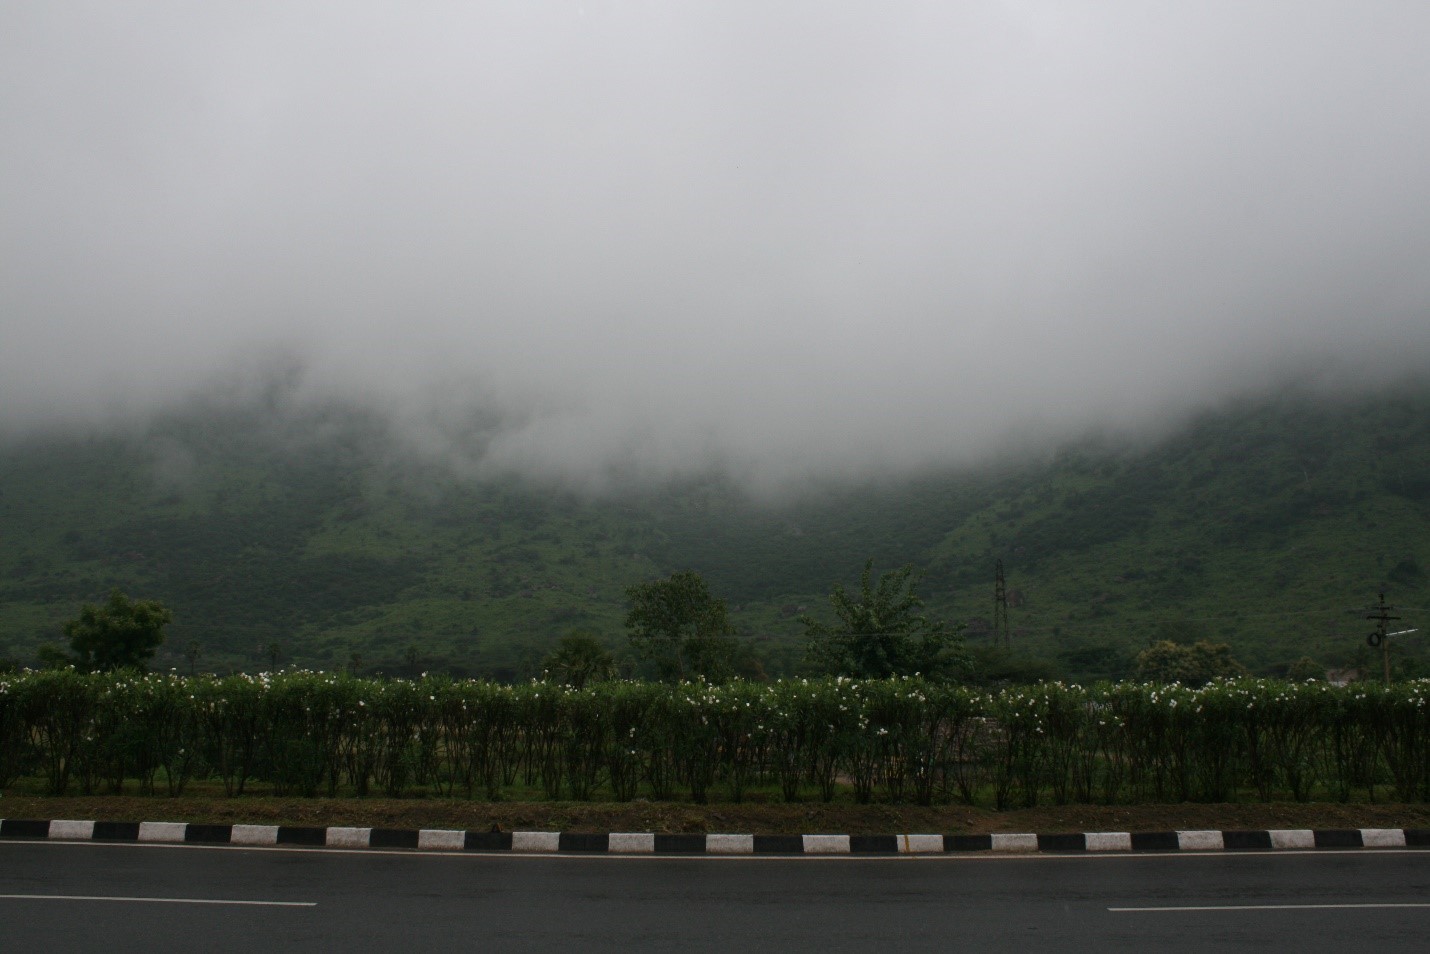 A mist settles over hills in the southern Indian state of Tamil Nadu during the Northeast Indian Monsoon season. Credit: Sara Vankm